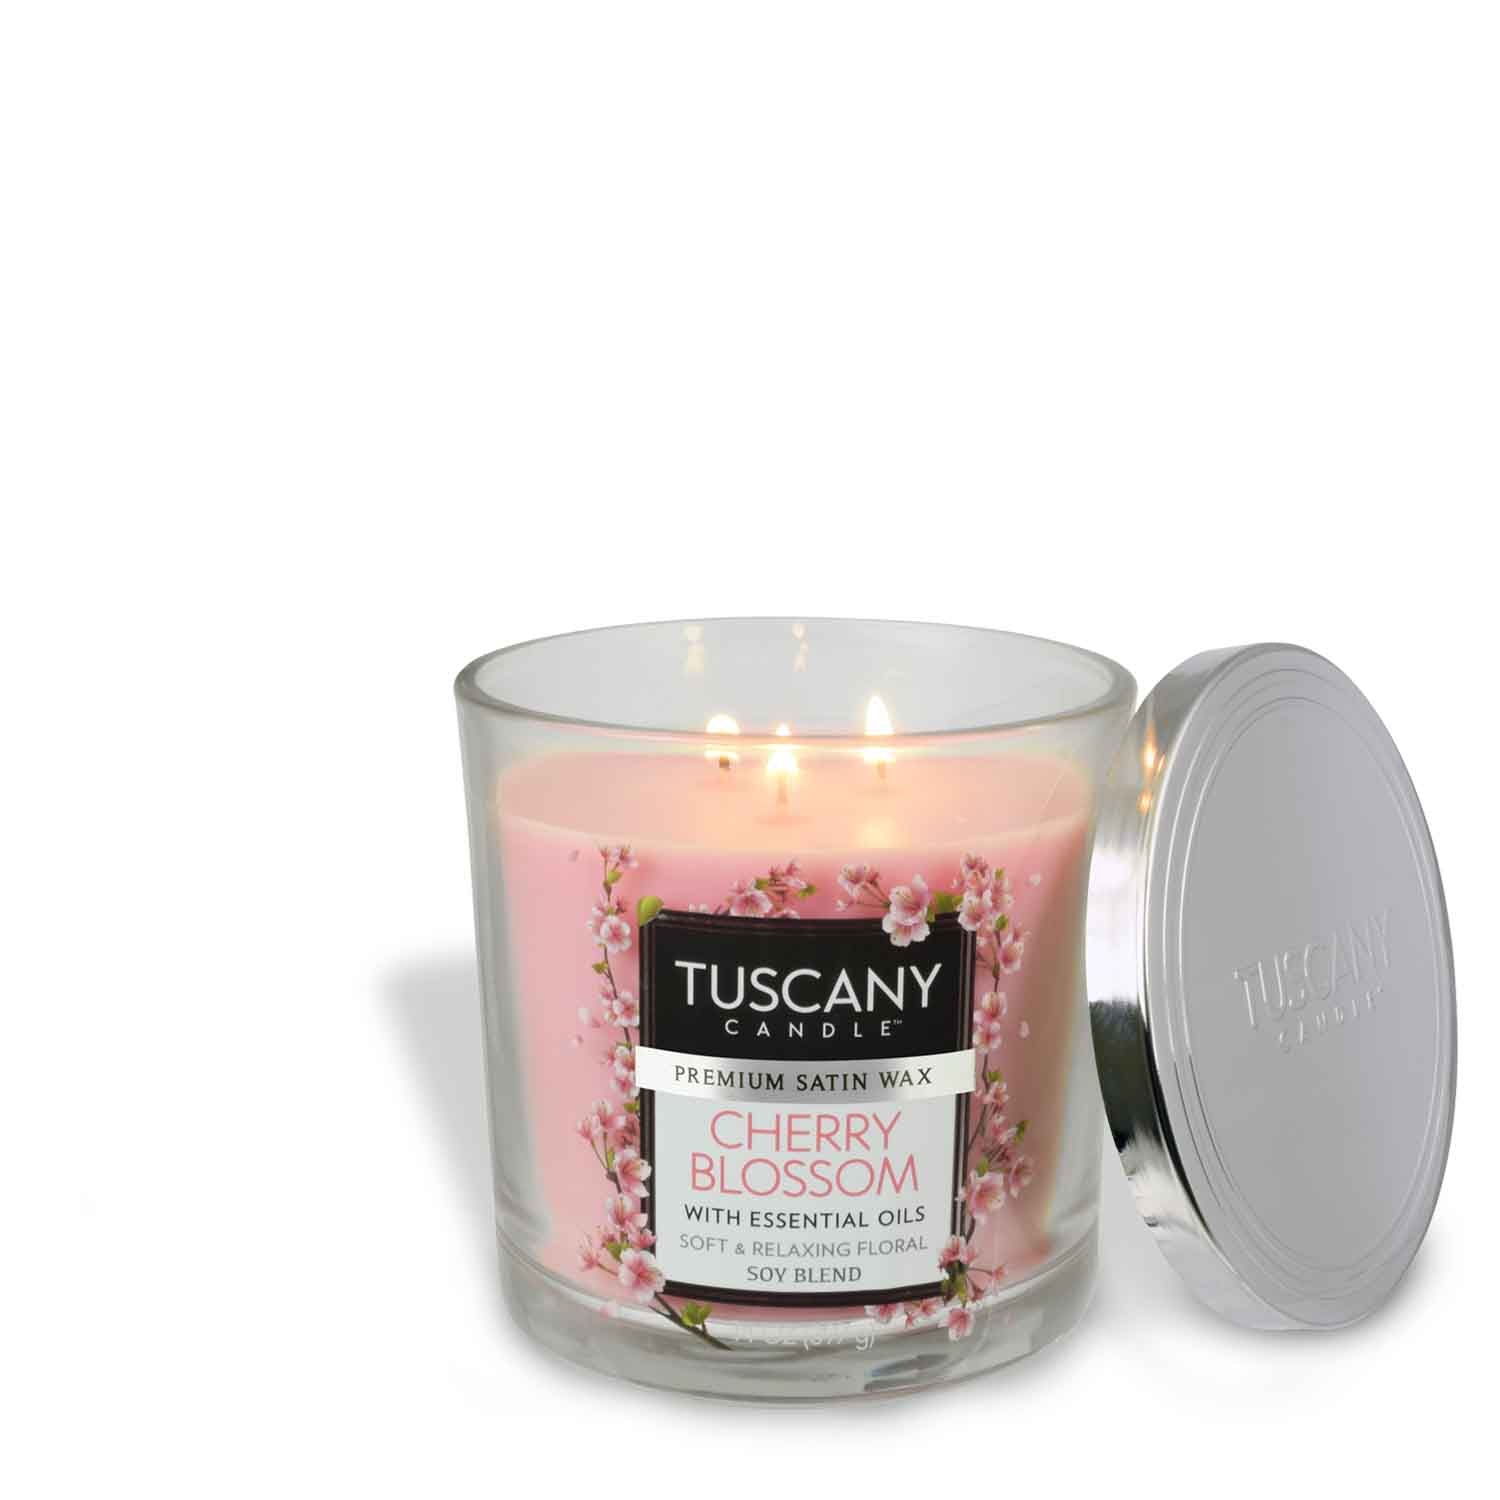 Tuscany Candle Cherry Blossom Long-Lasting Scented Jar Candle (14 oz) with a long burn time.